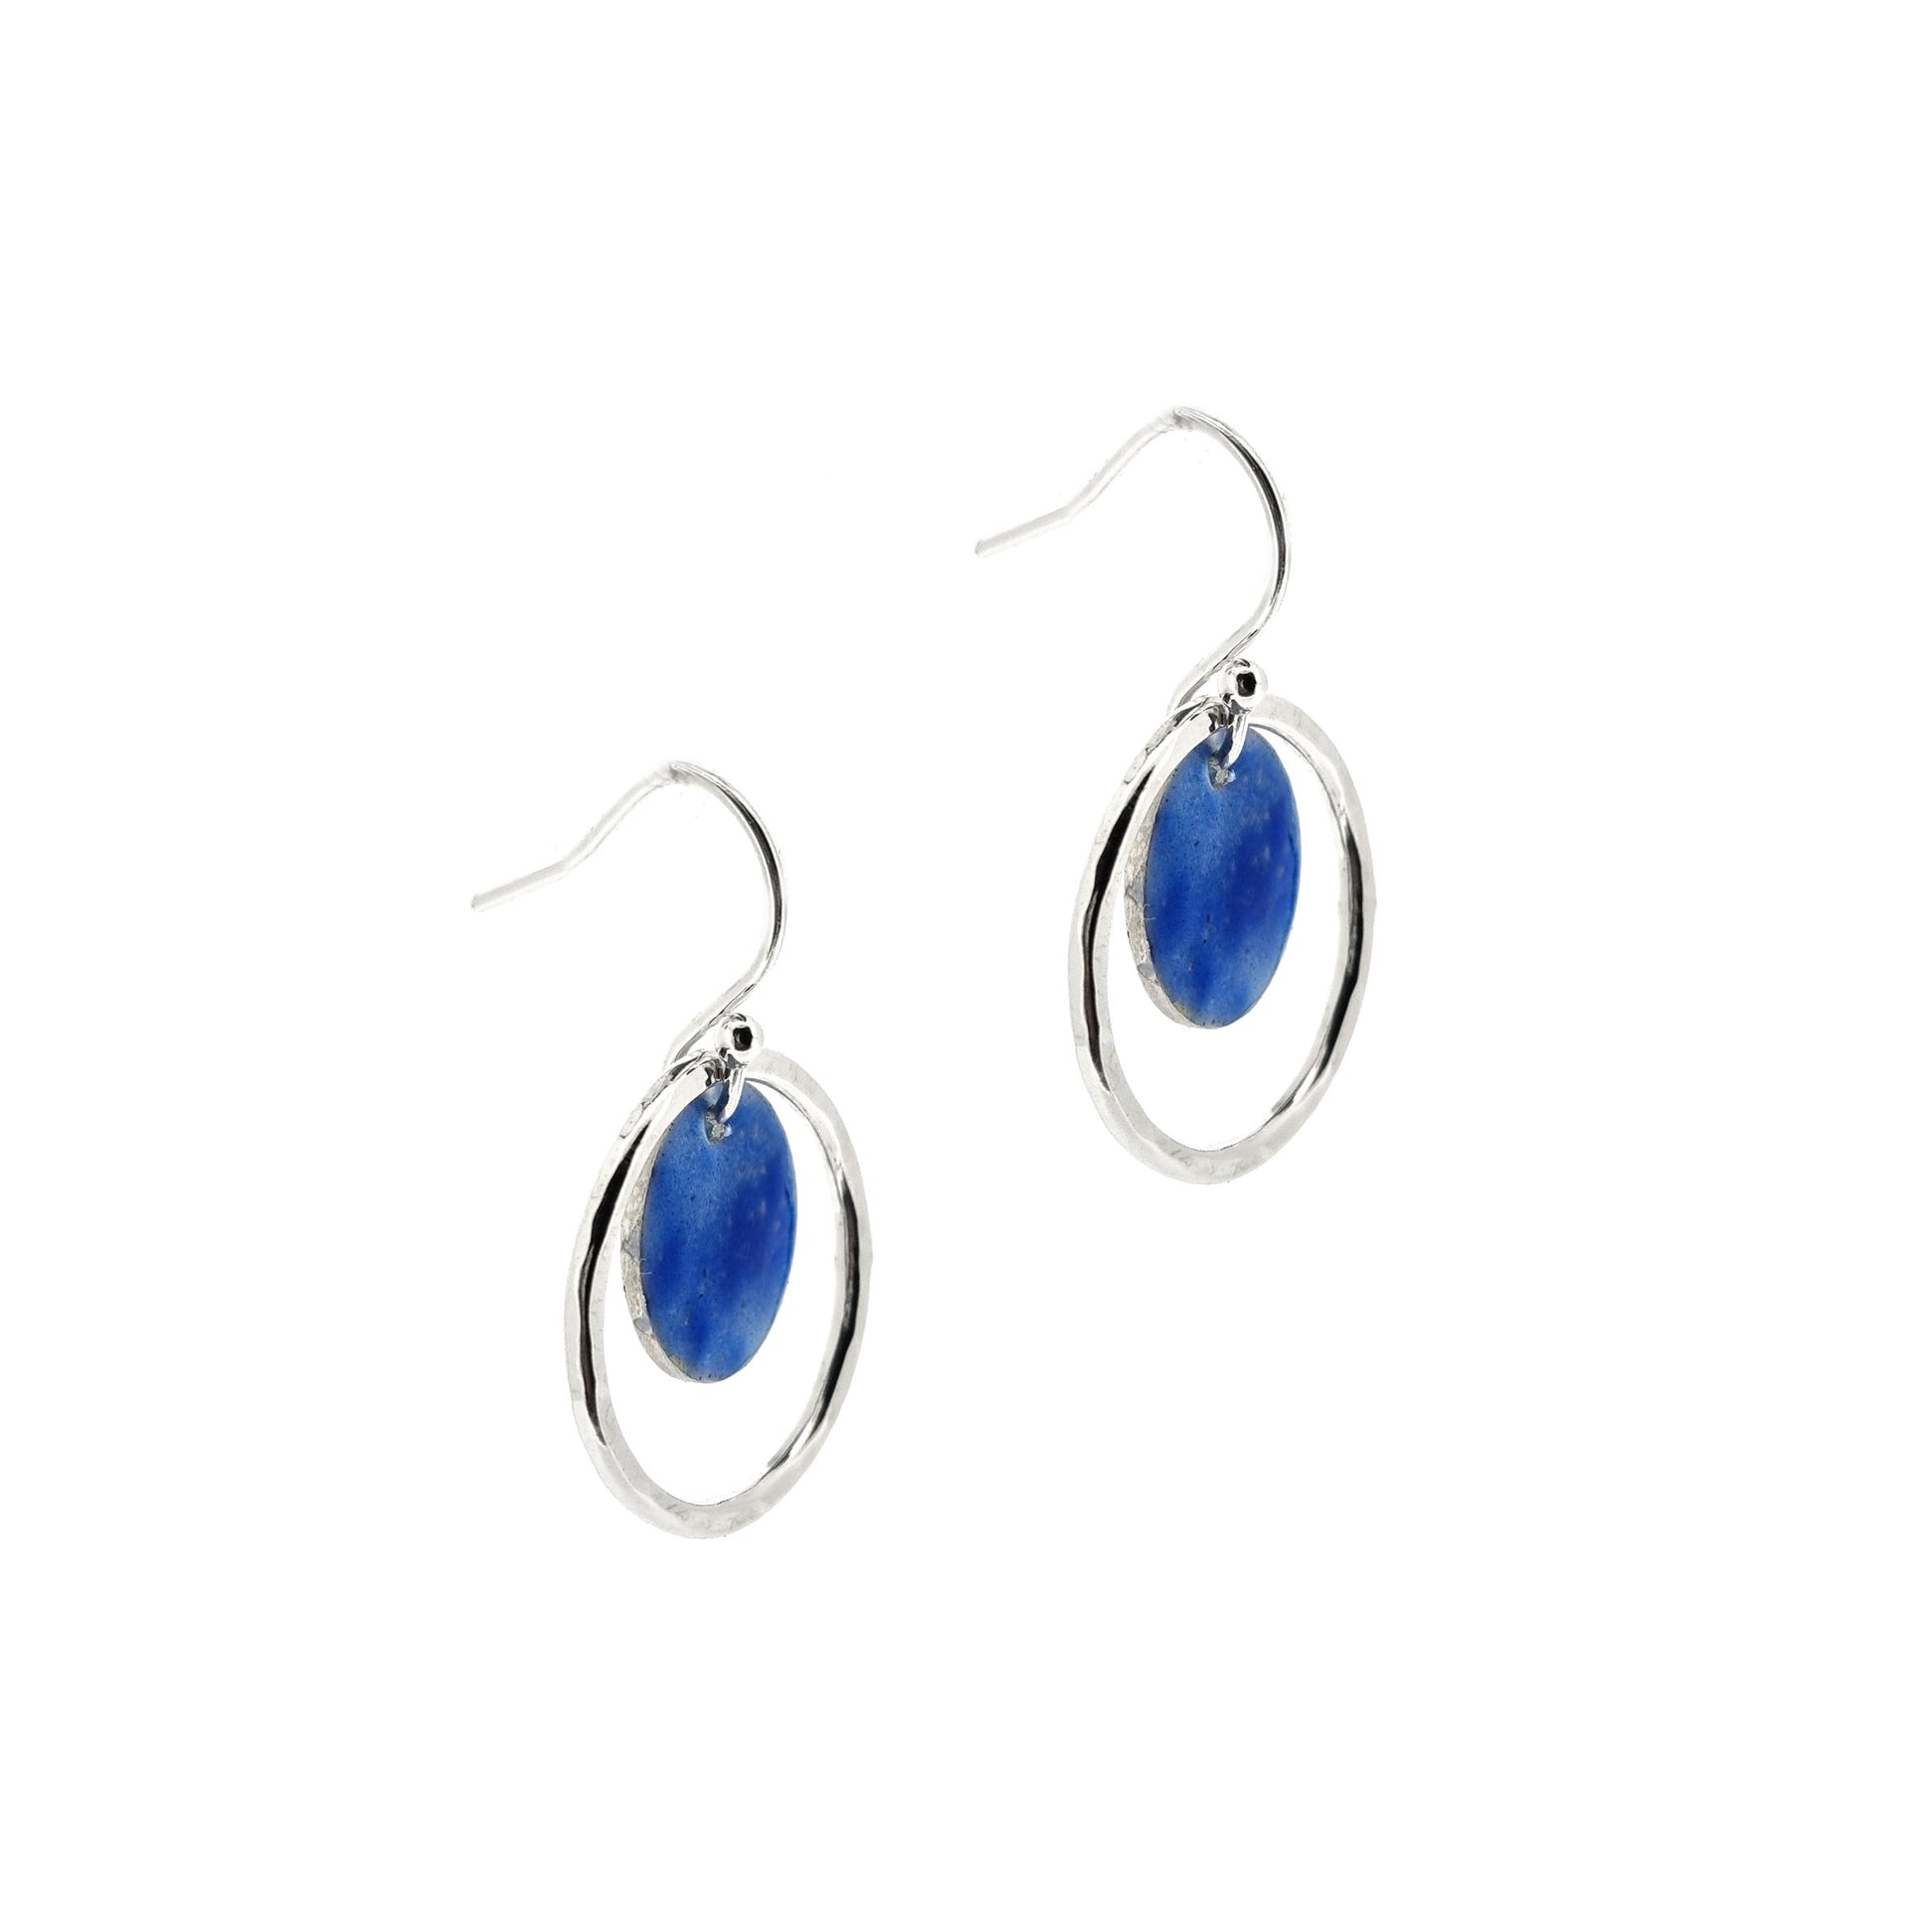 Silver drop earrings with a central disc featuring patterned dark blue enamel surrounded by a silver hammered open circle. 